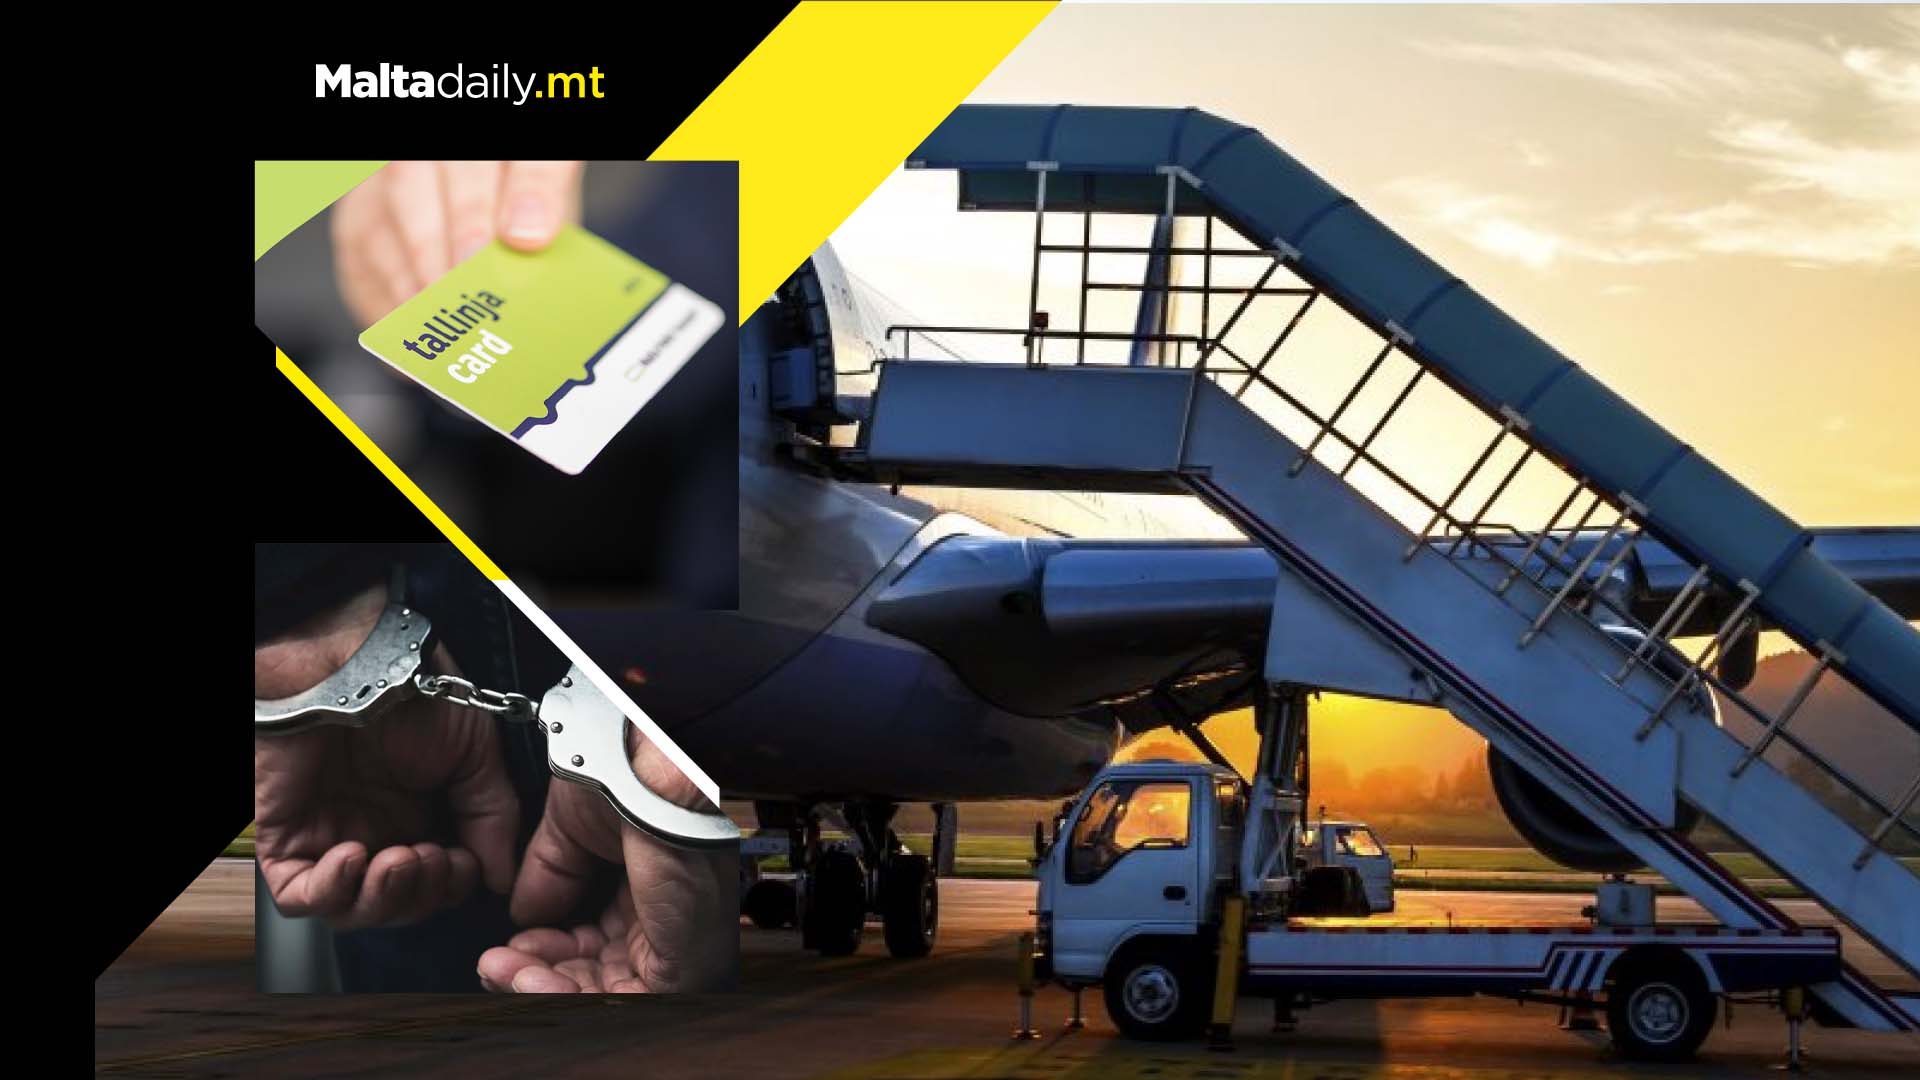 Youth arrested for trying to board plane with Tallinja bus card